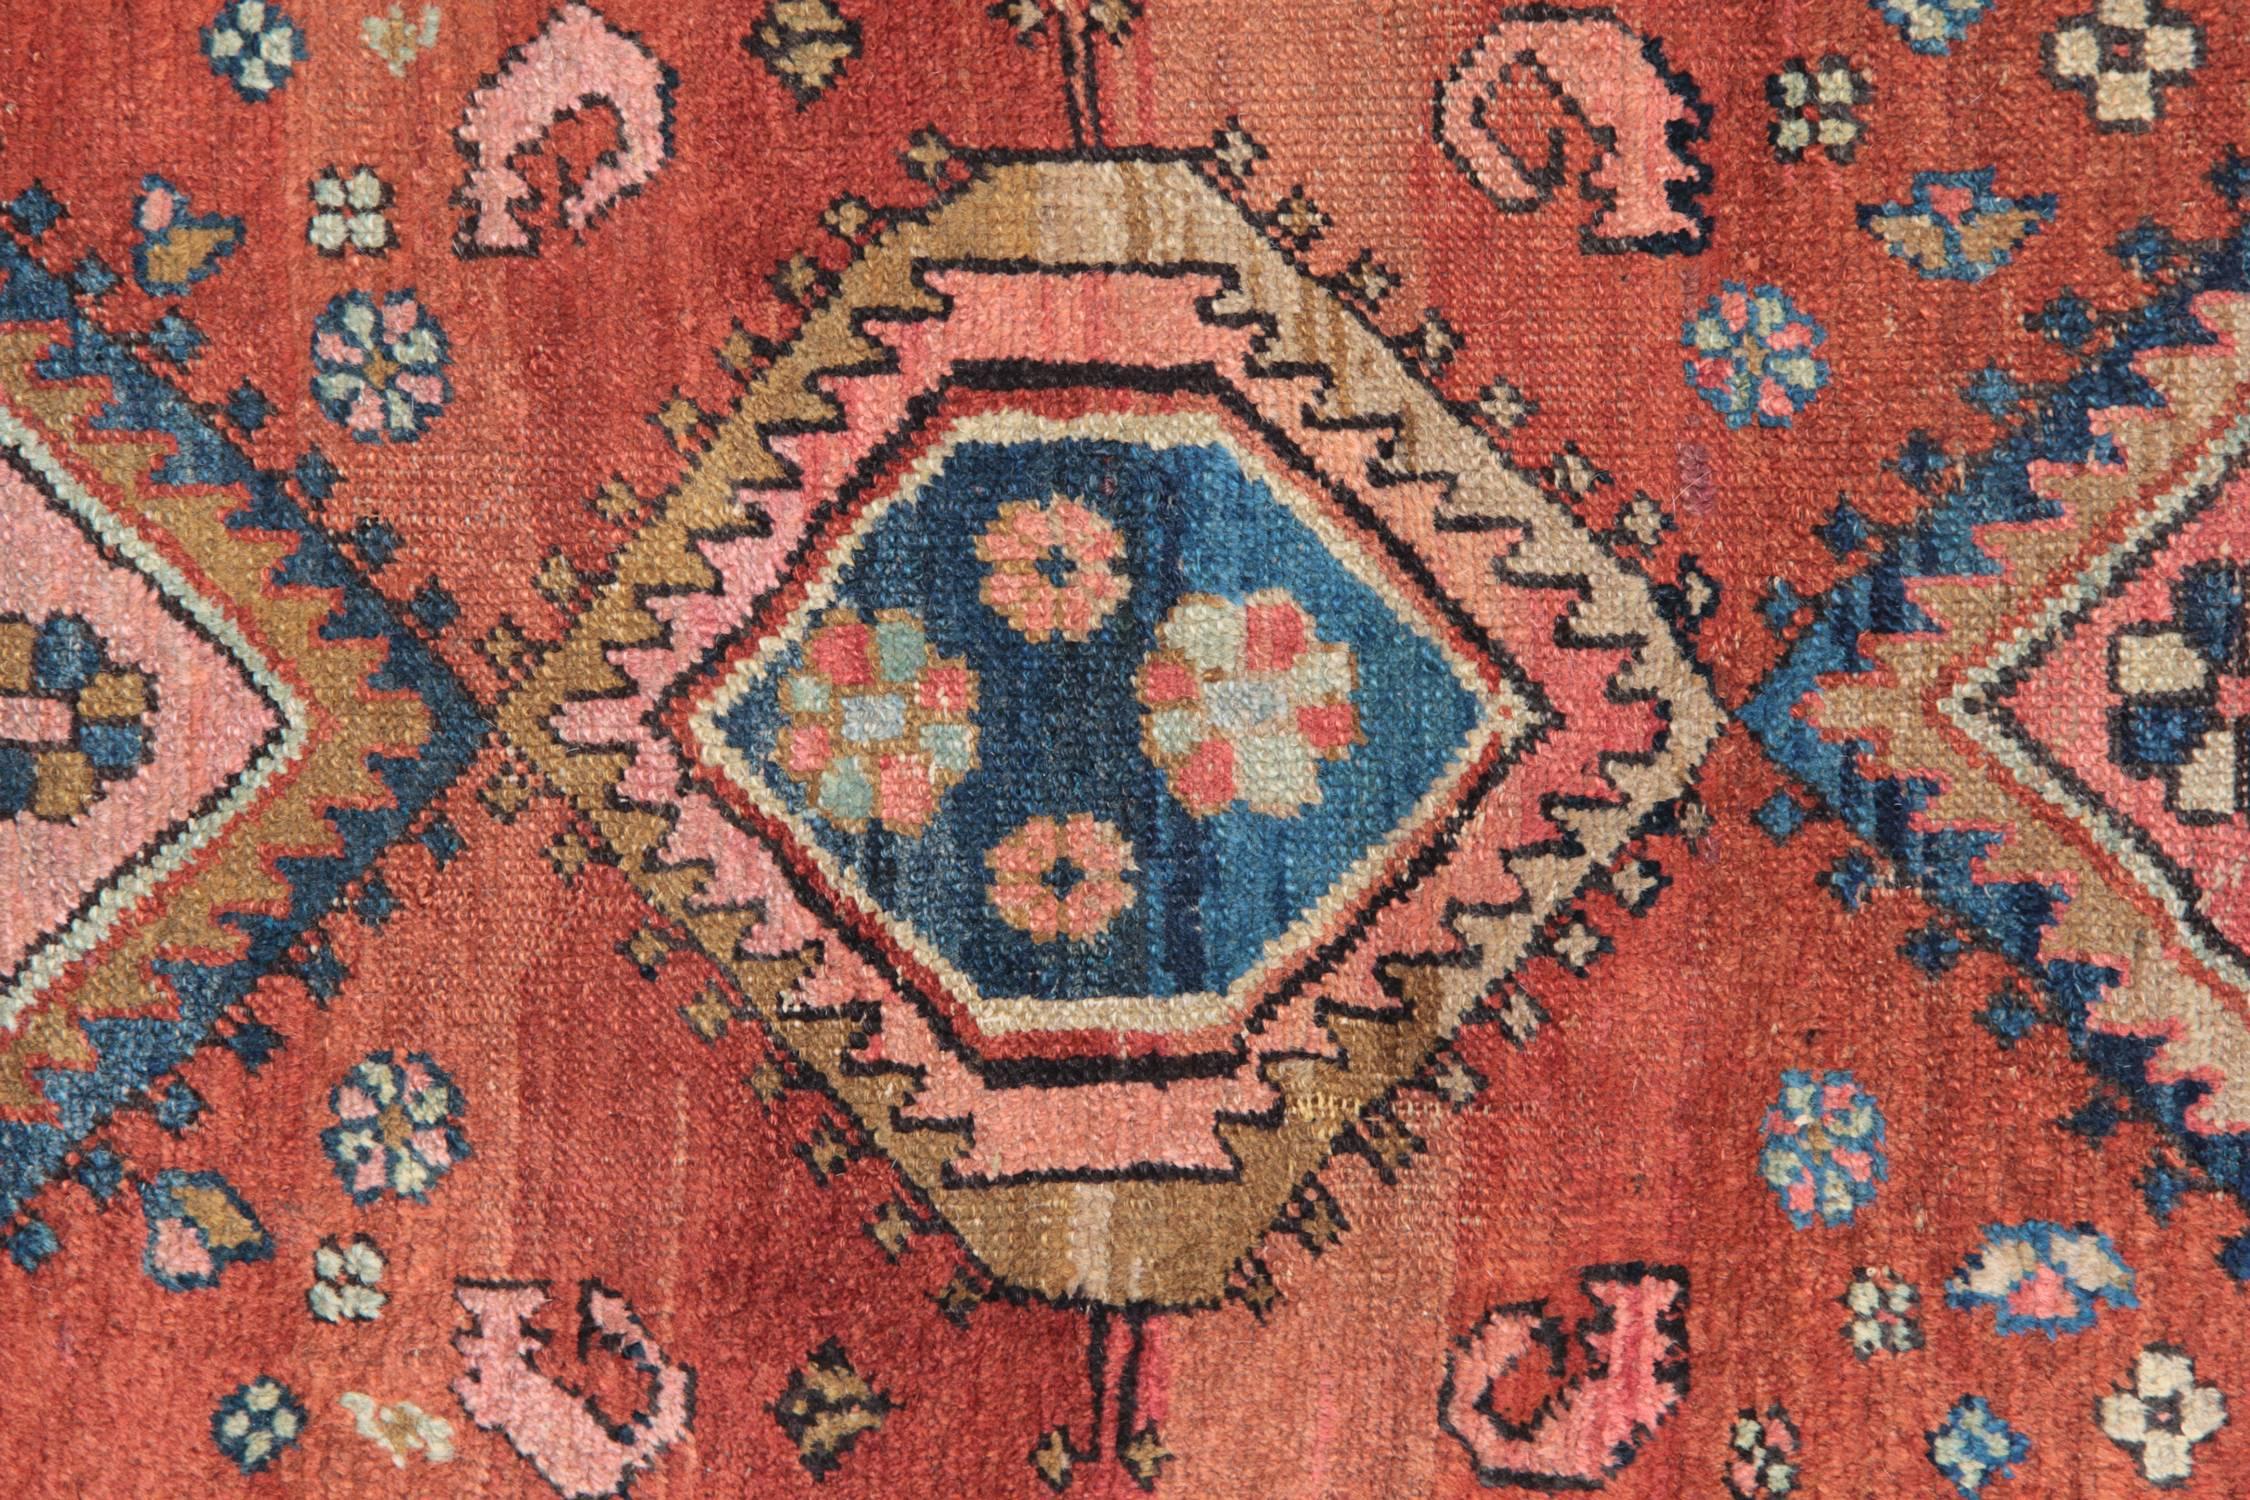 Vegetable Dyed Antique Carpet Runners, Persian Rugs and Runners from Heriz